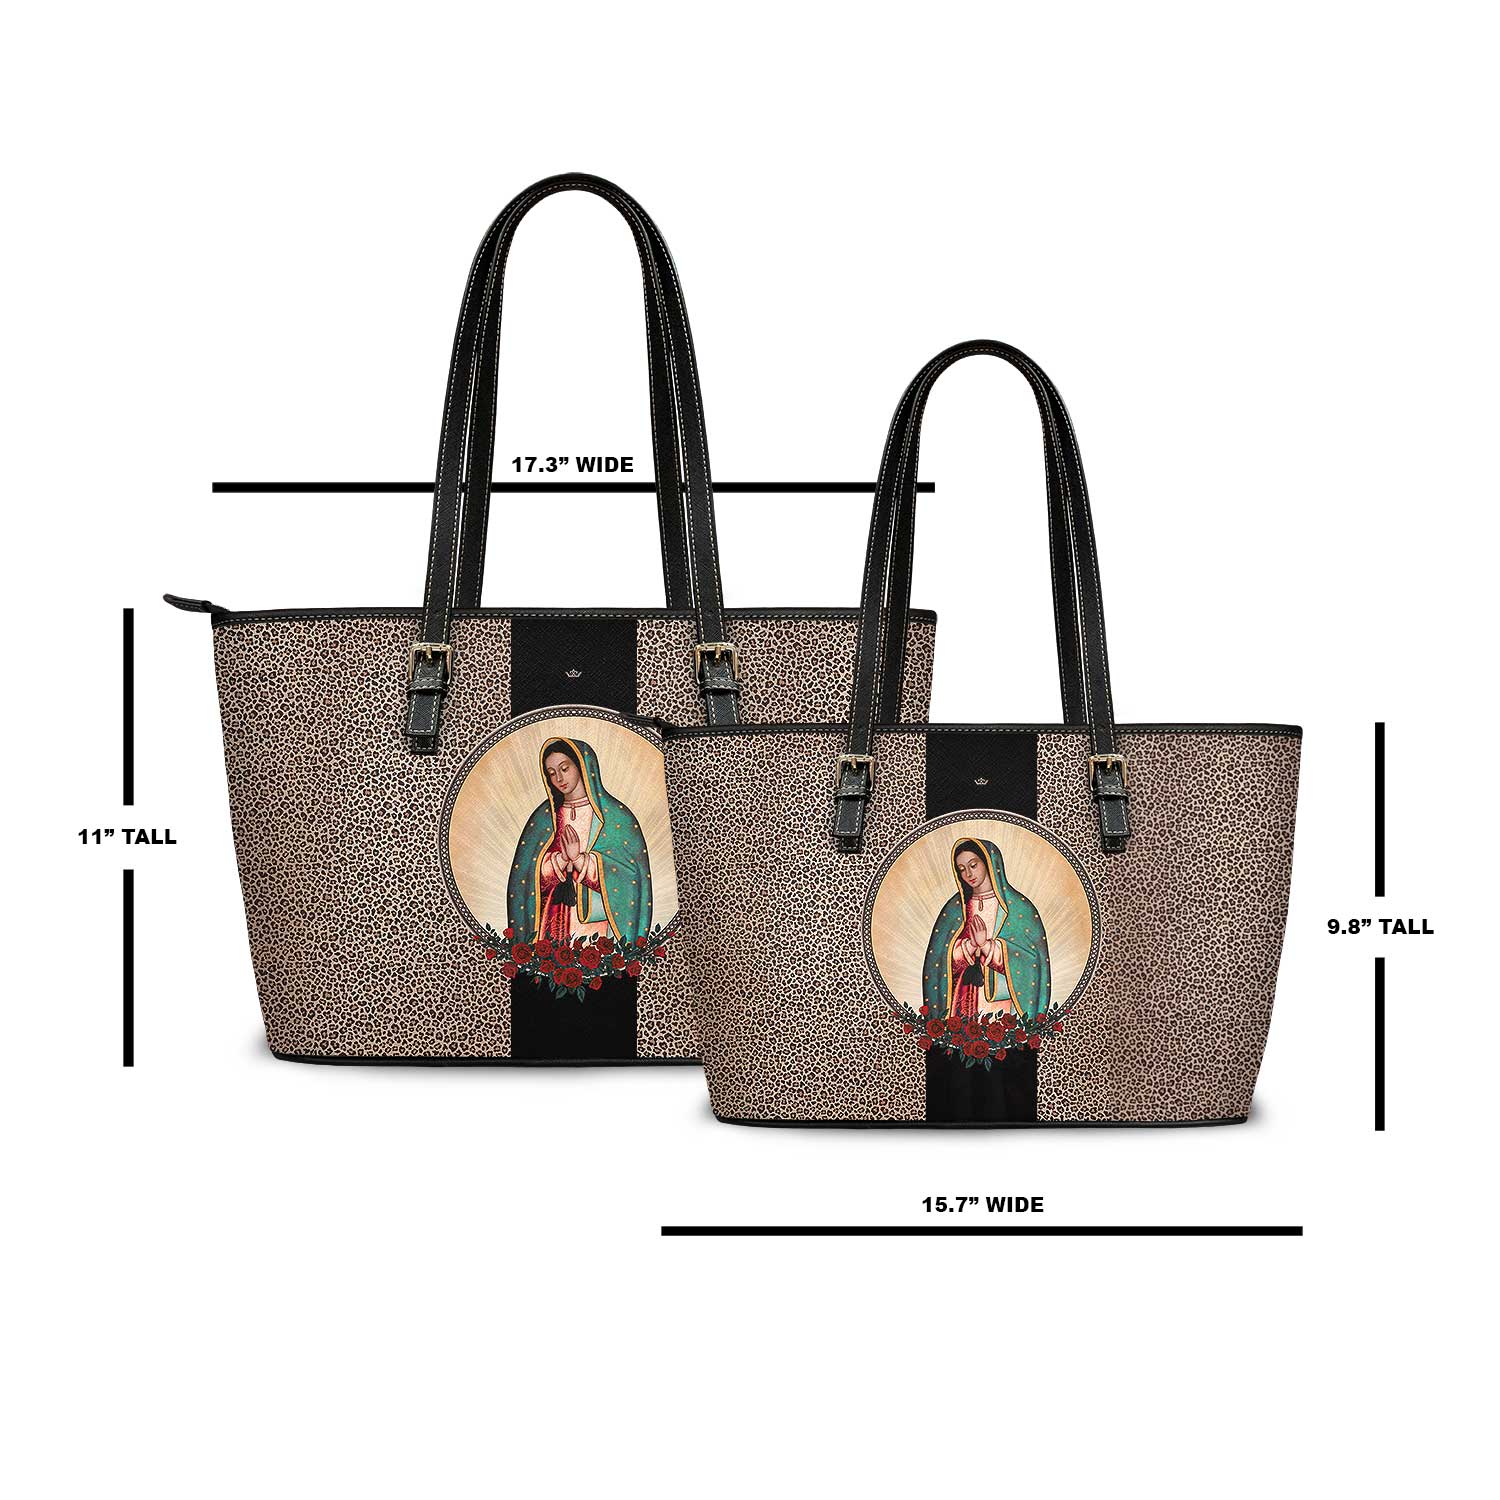 Our Lady of Guadalupe Tote Bag (Leopard) - VENXARA®